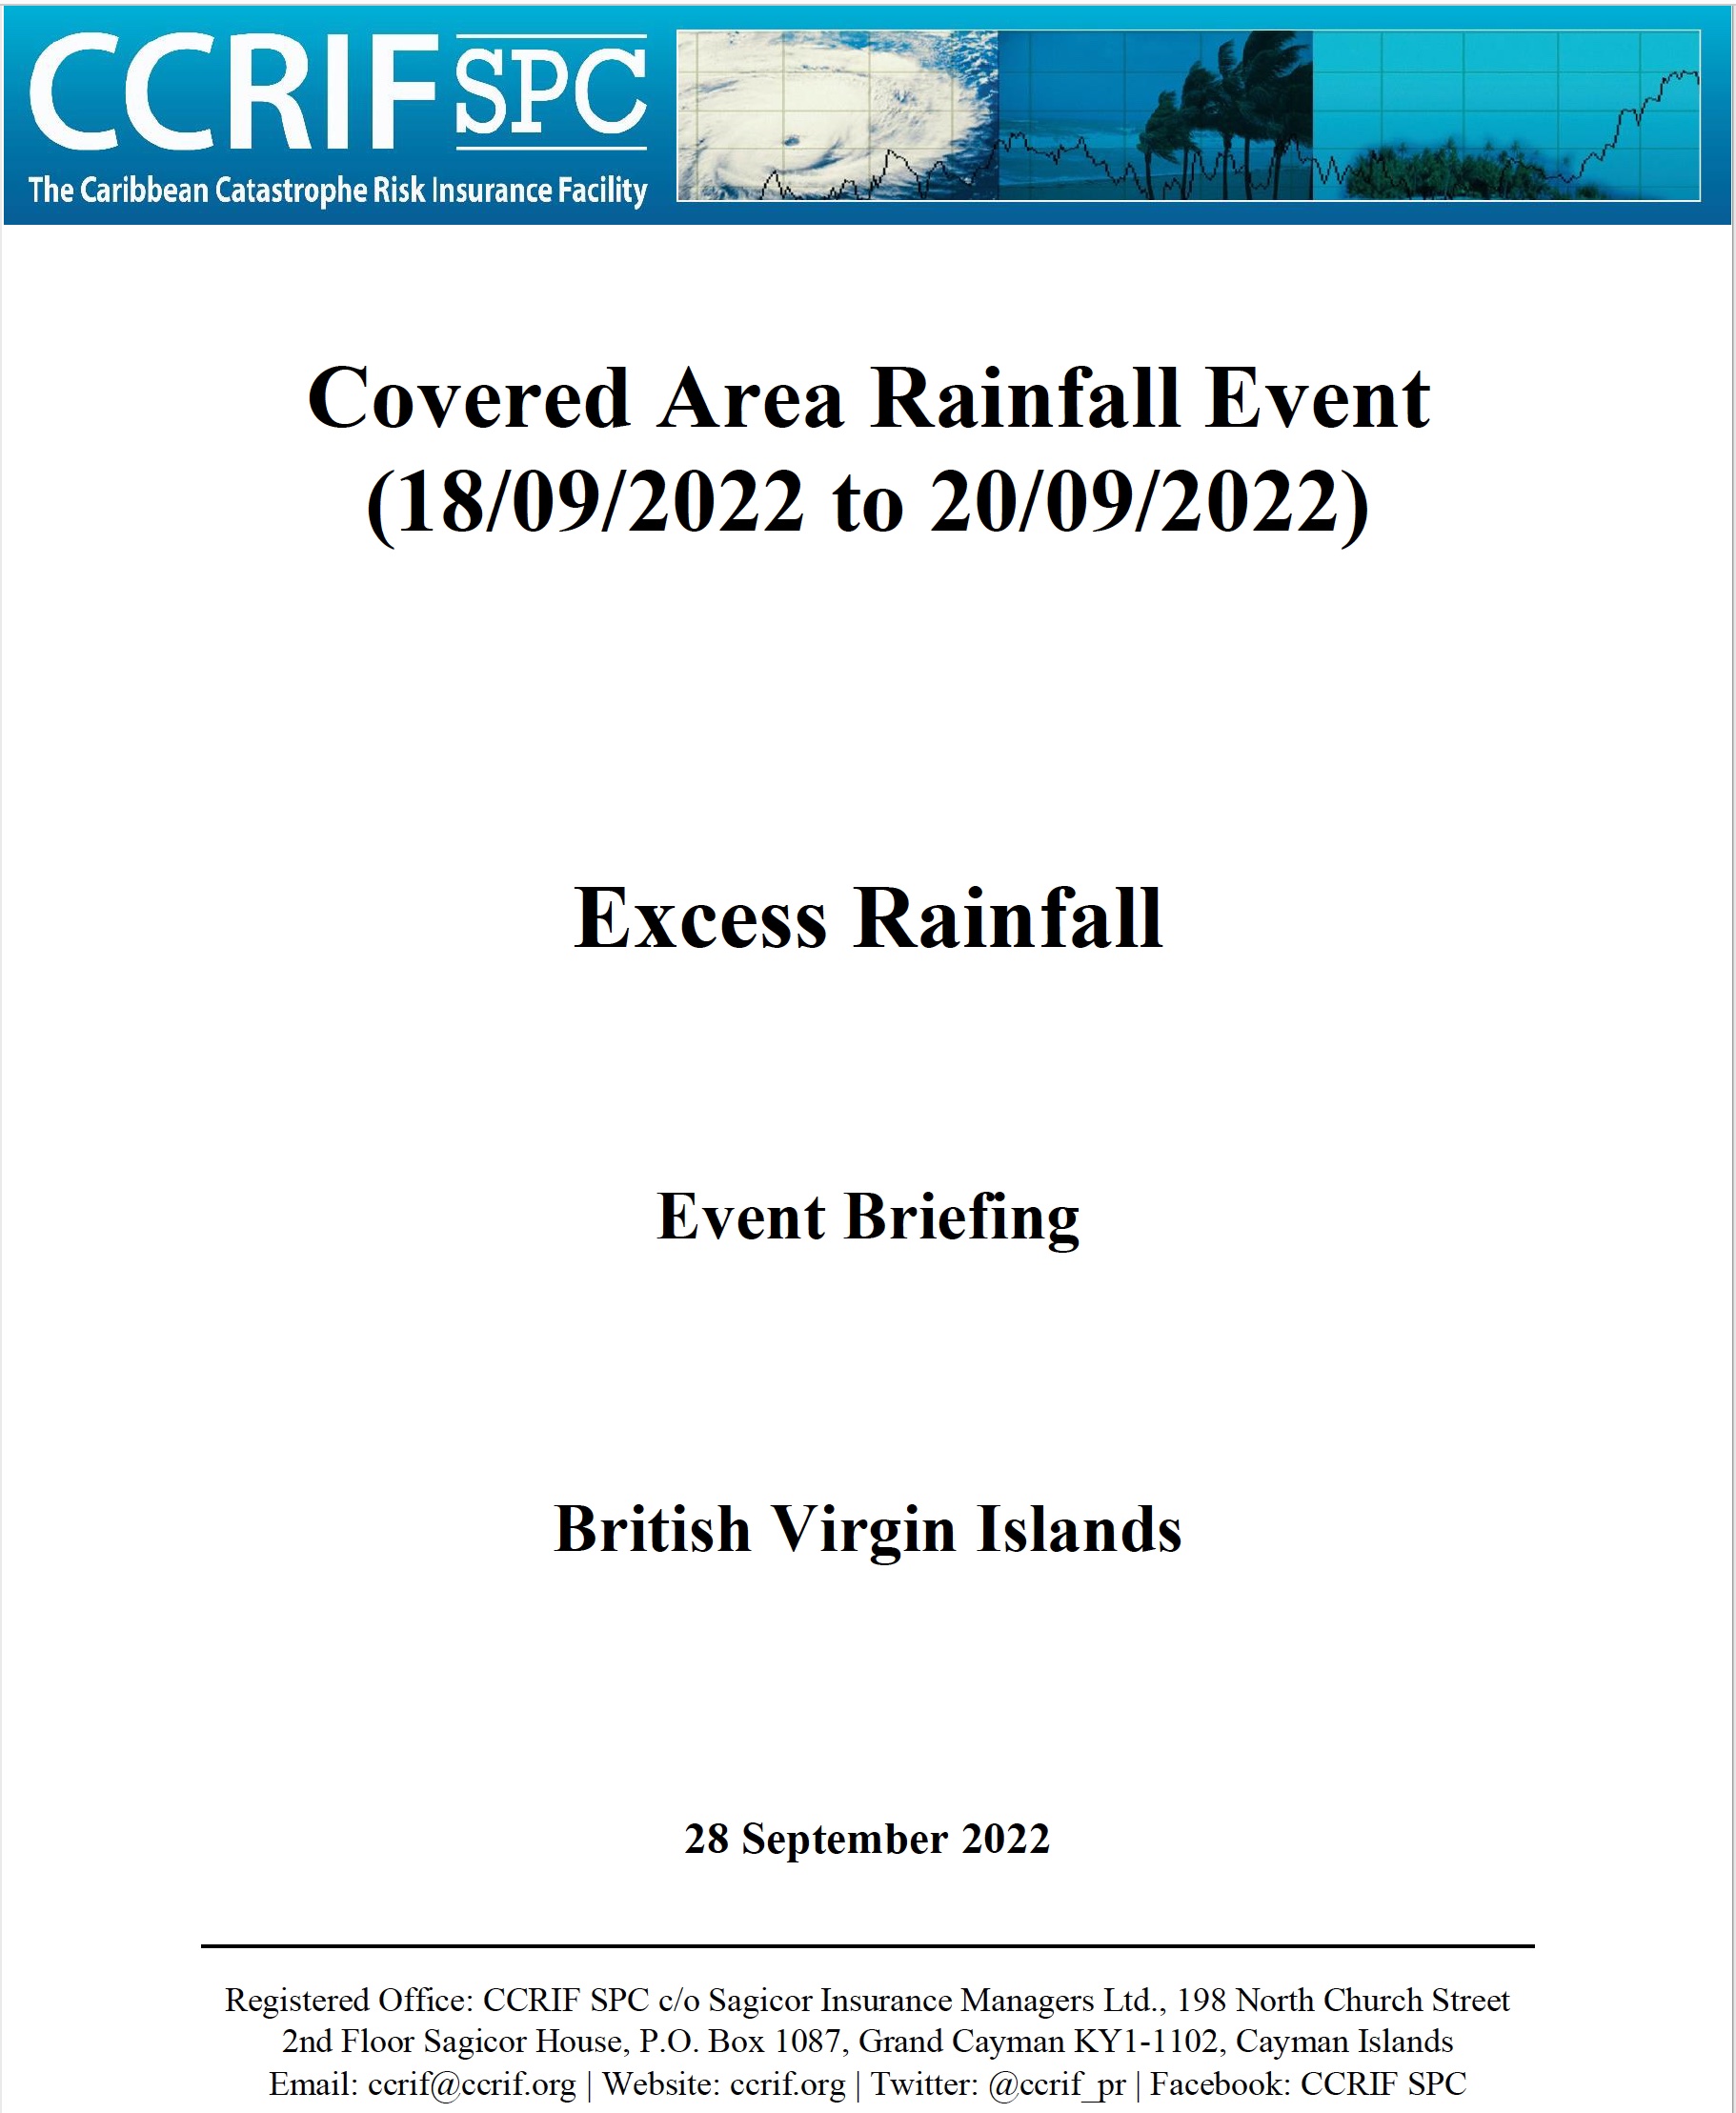 Event Briefing - Excess Rainfall - Covered Area Rainfall Event - British Virgin Islands - September 28 2022